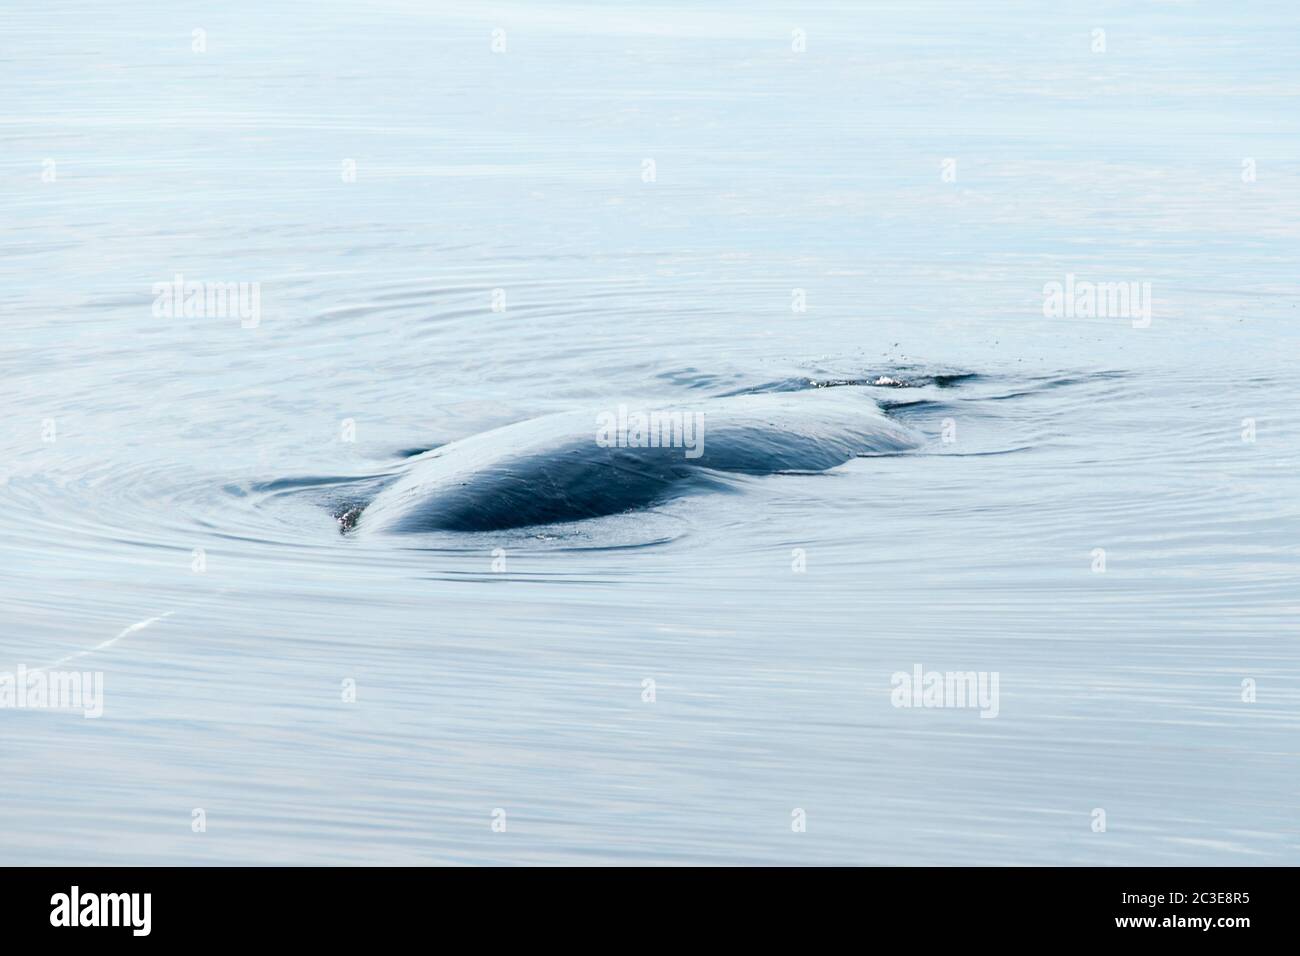 A humpback whale sleeping on the surface of the water in the Pacific Ocean, Great Bear Rainforest region, central coast, British Columbia, Canada. Stock Photo